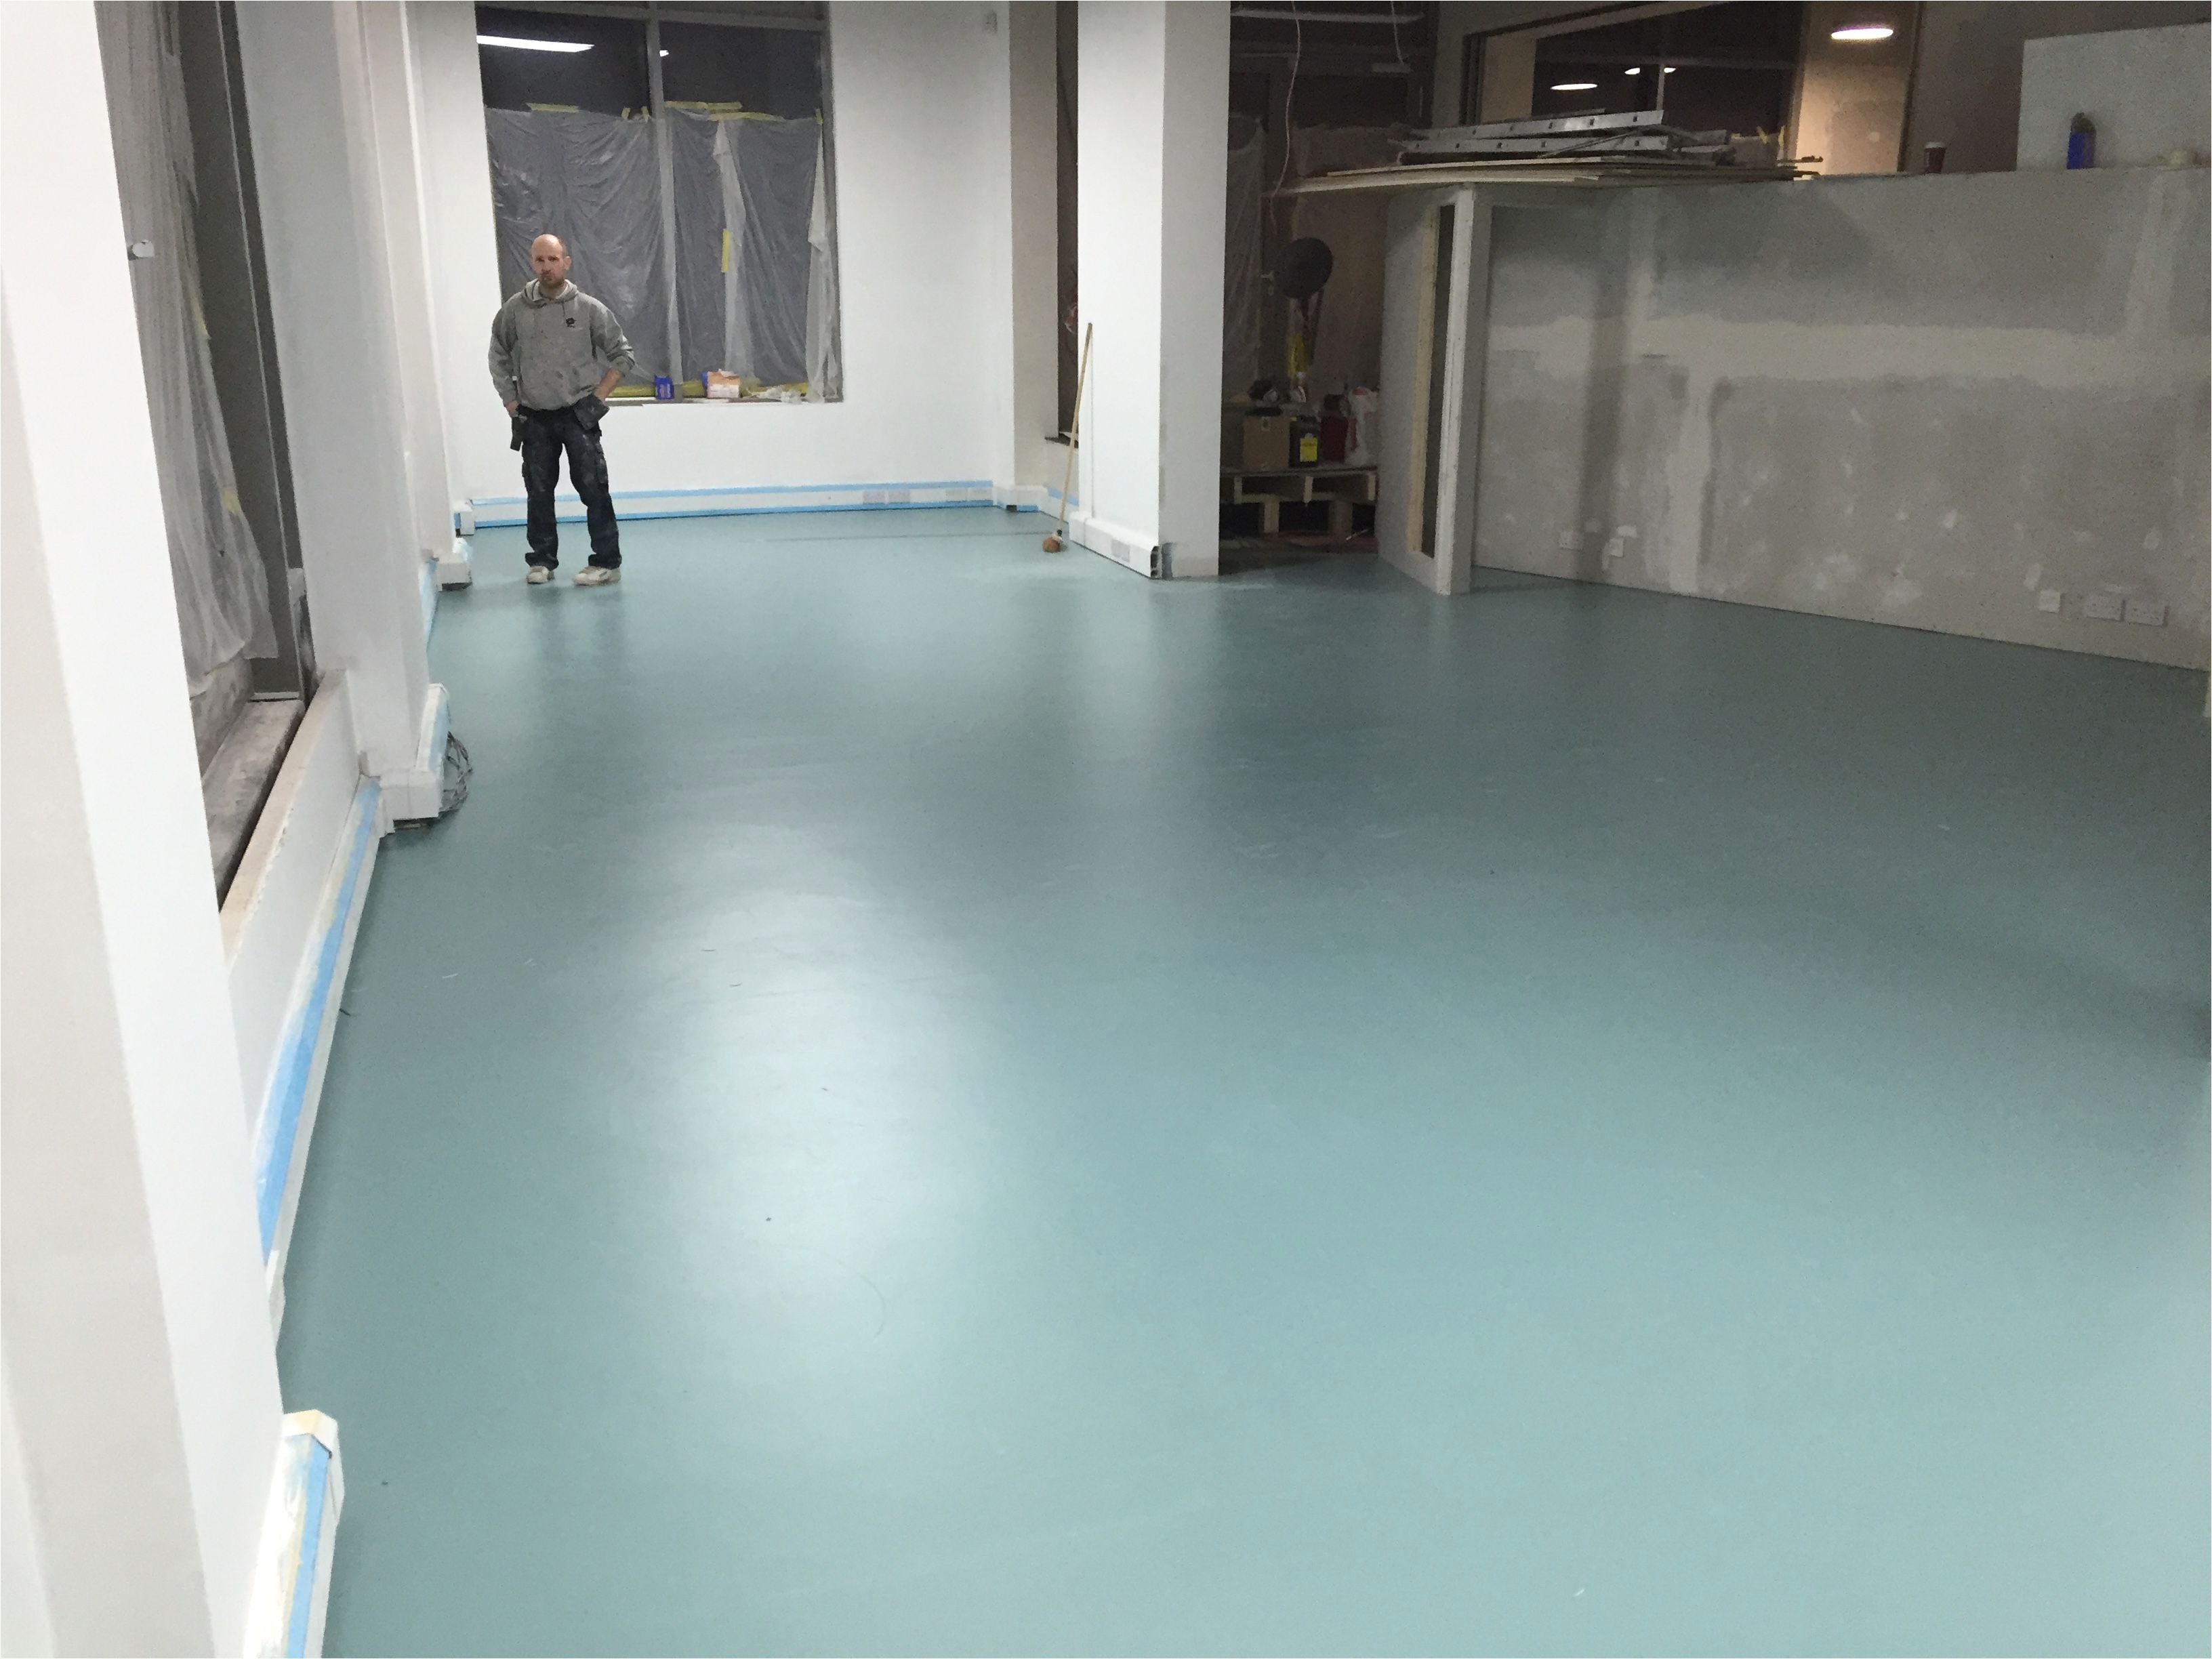 50 pictures of 50 new rubber floor tiles pics july 2018